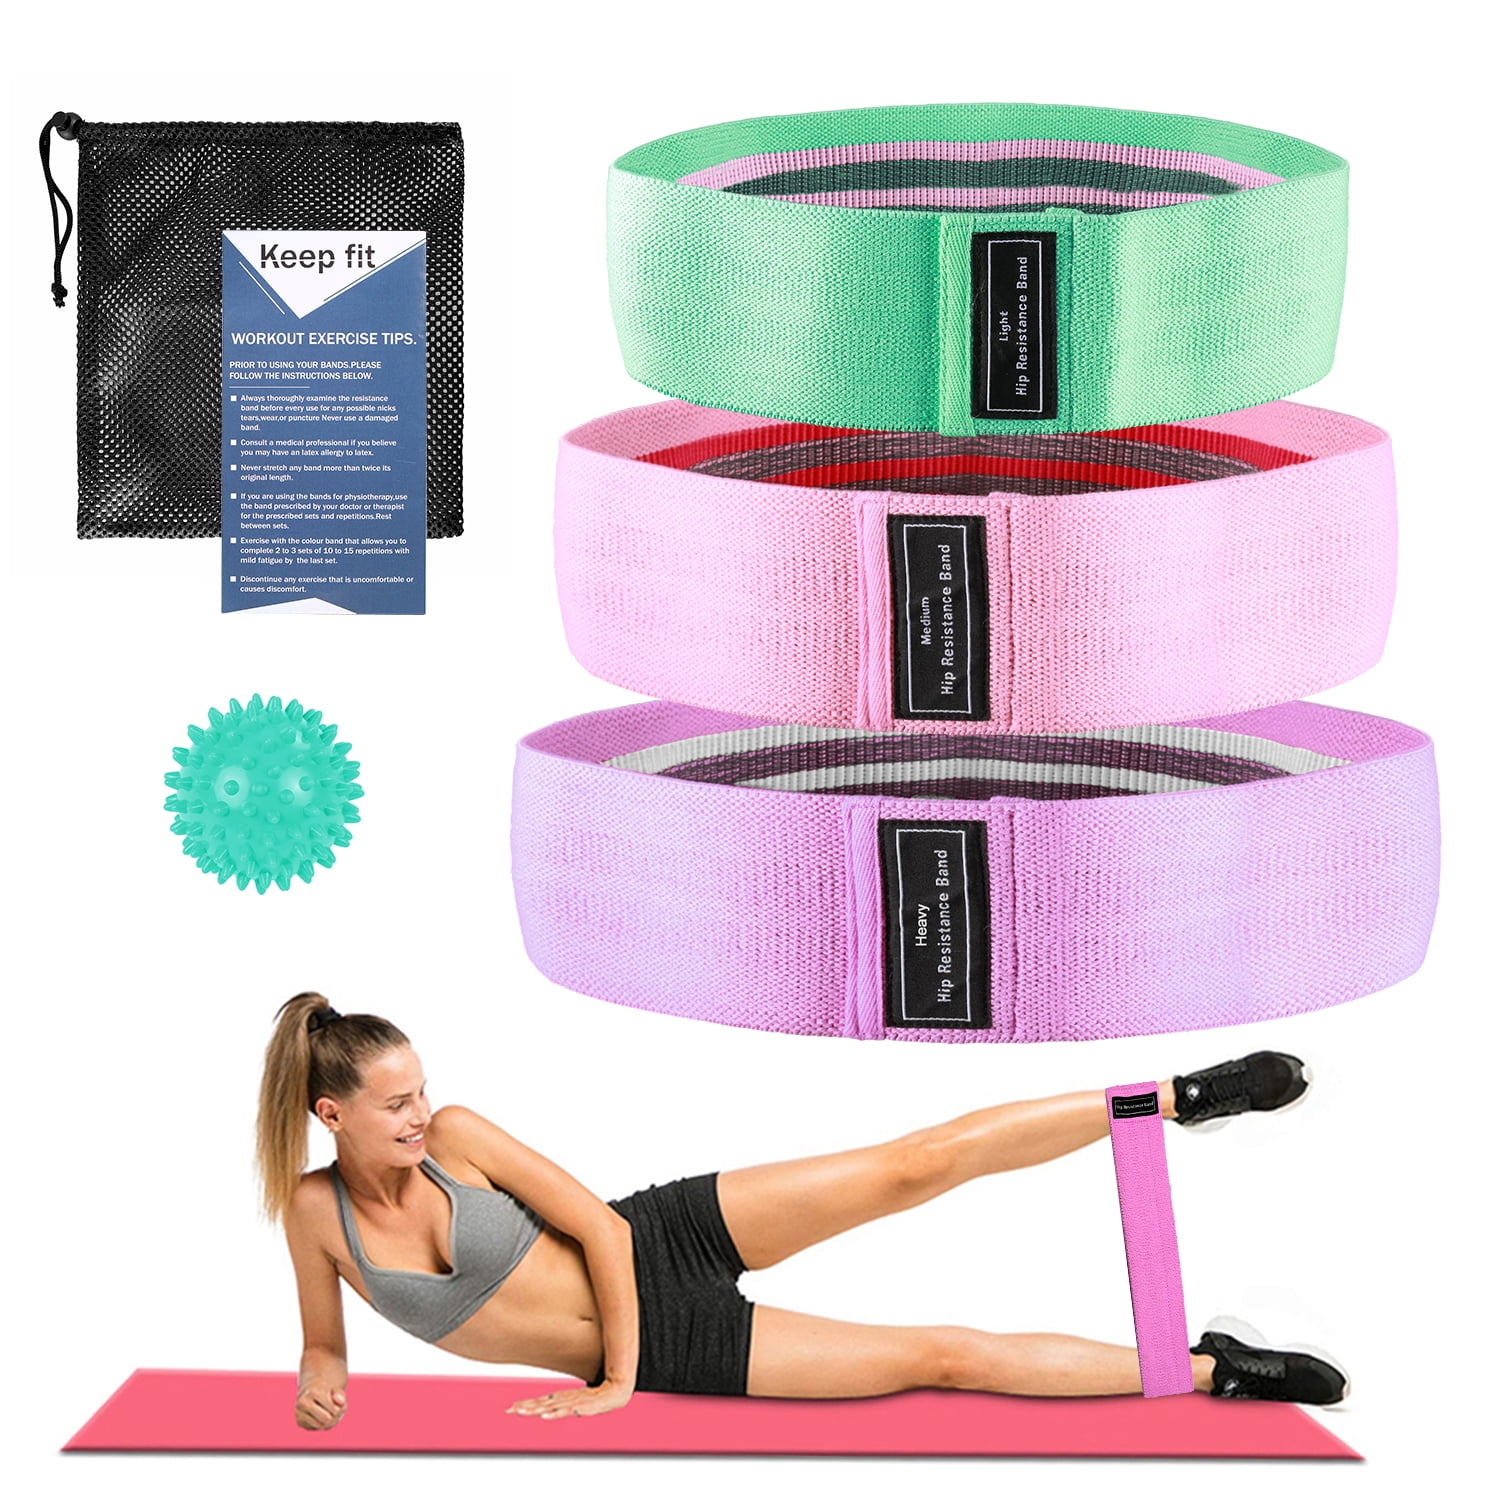 Resistance Bands Exercise Bands 3 Pack Set Non-Slip Gym Bands Workout Booty Bands for Yoga Pilates Legs and Butt Training Bands